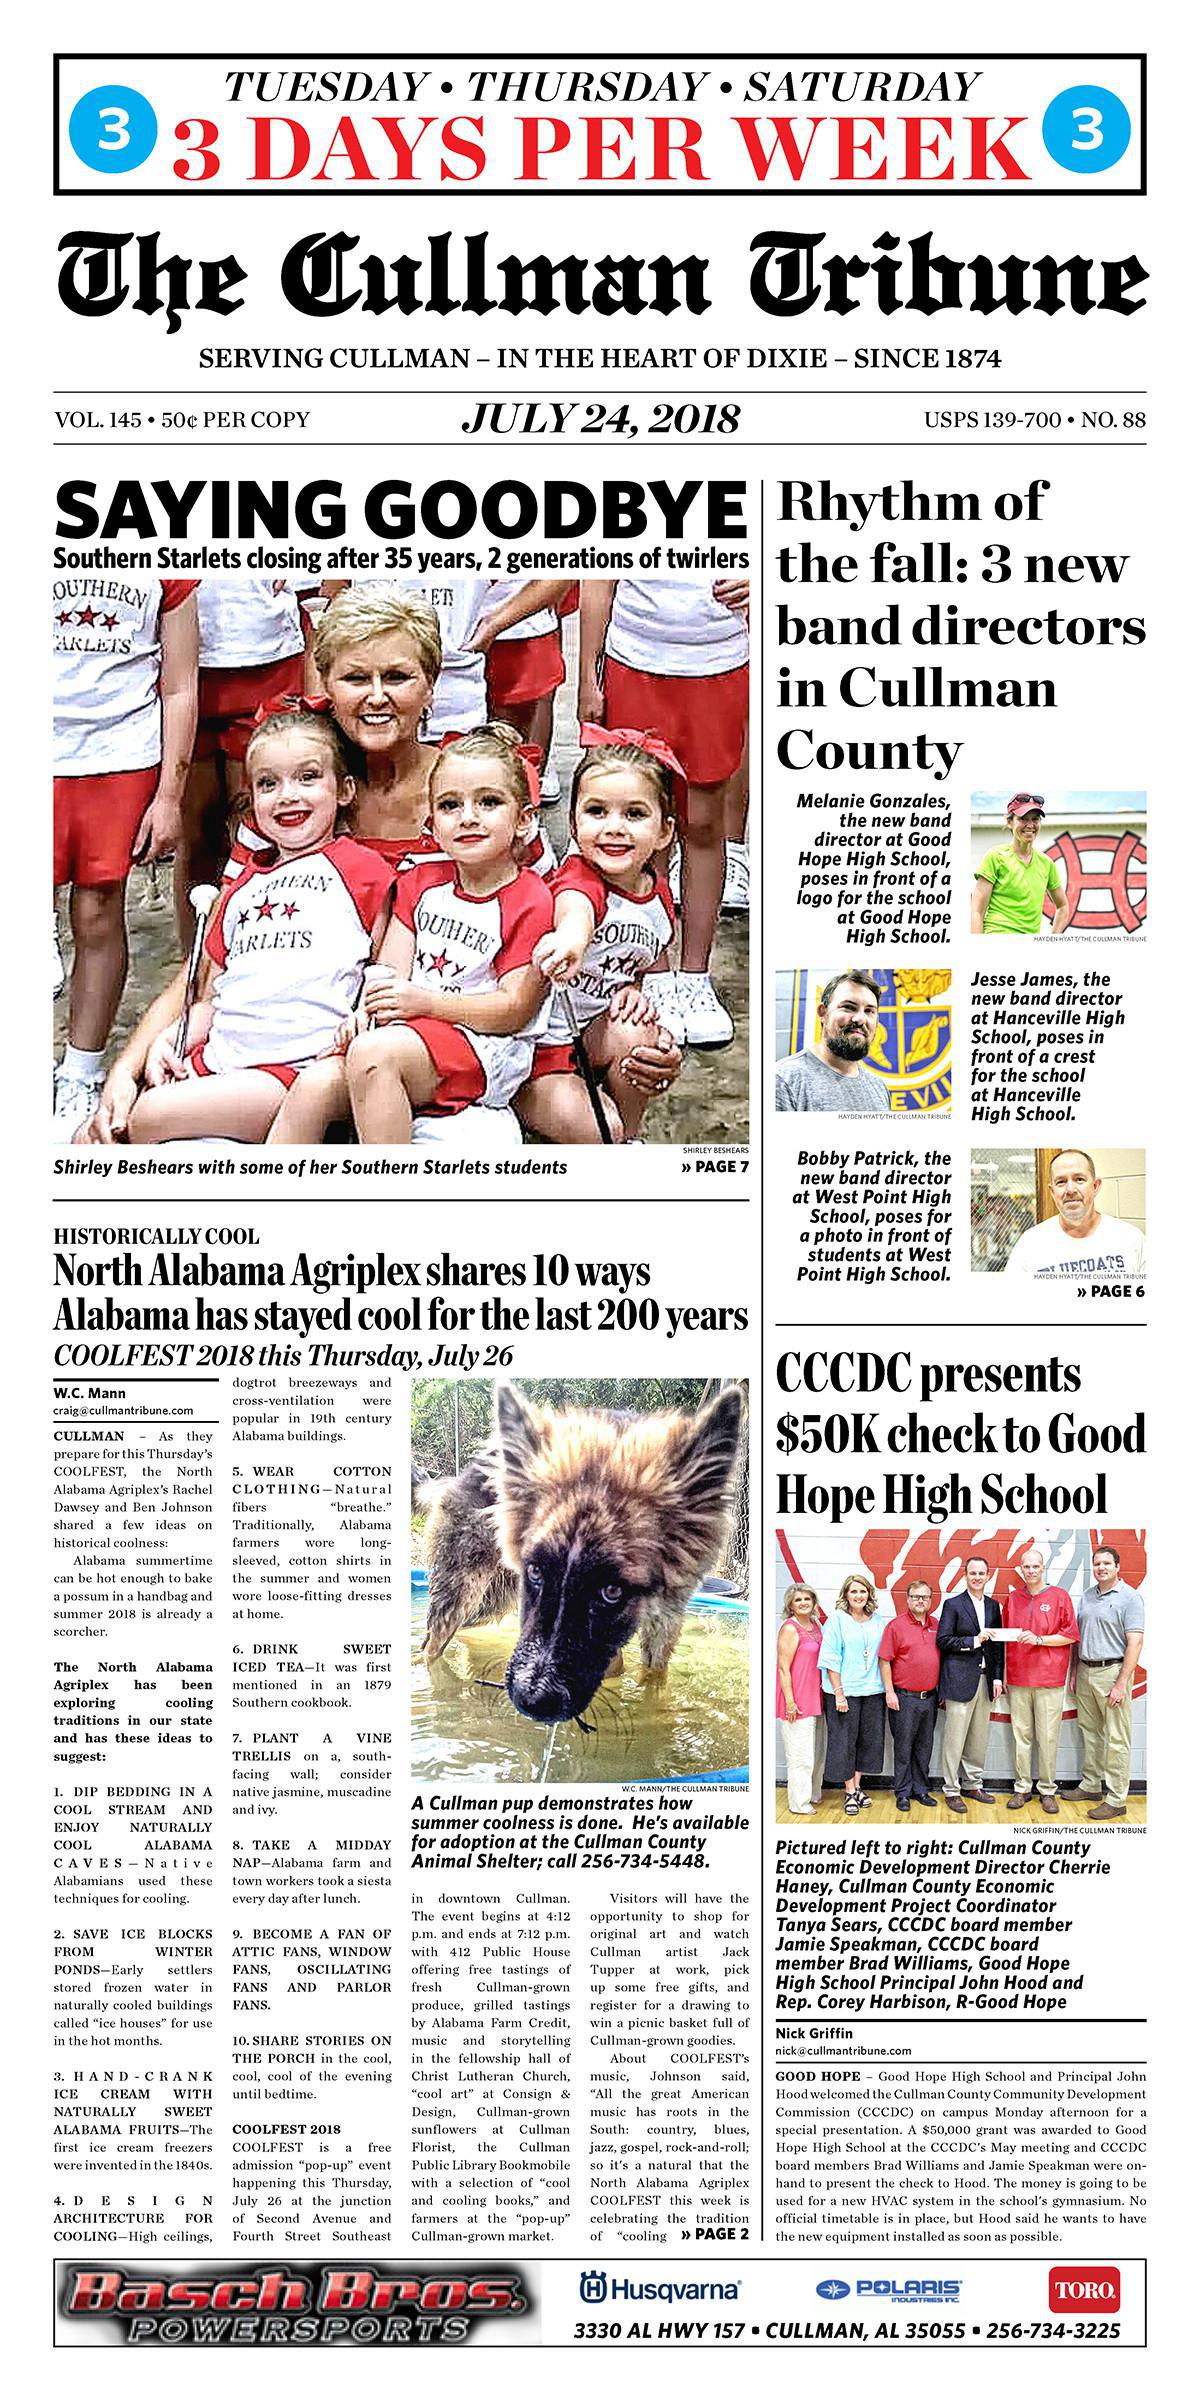 Good Morning Cullman! The 07-24-2018 edition of the Cullman Tribune is now ready to view